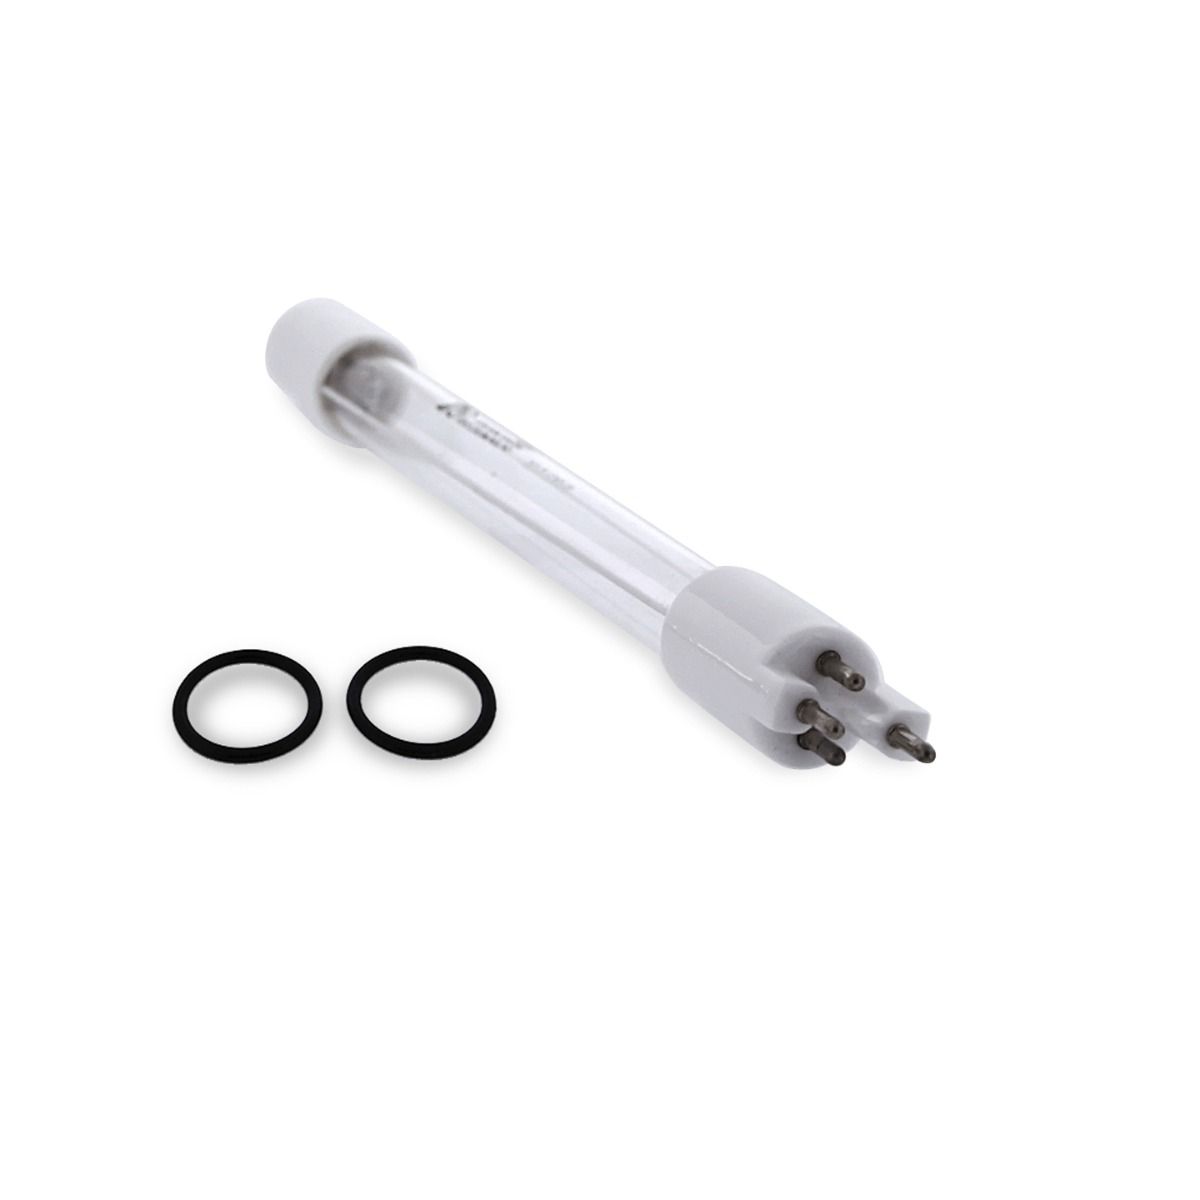 USWF Replacement for S212RL UV Lamp | Fits the VIQUA SQ-PA, SC1, &amp; VT-1 Series UV Systems